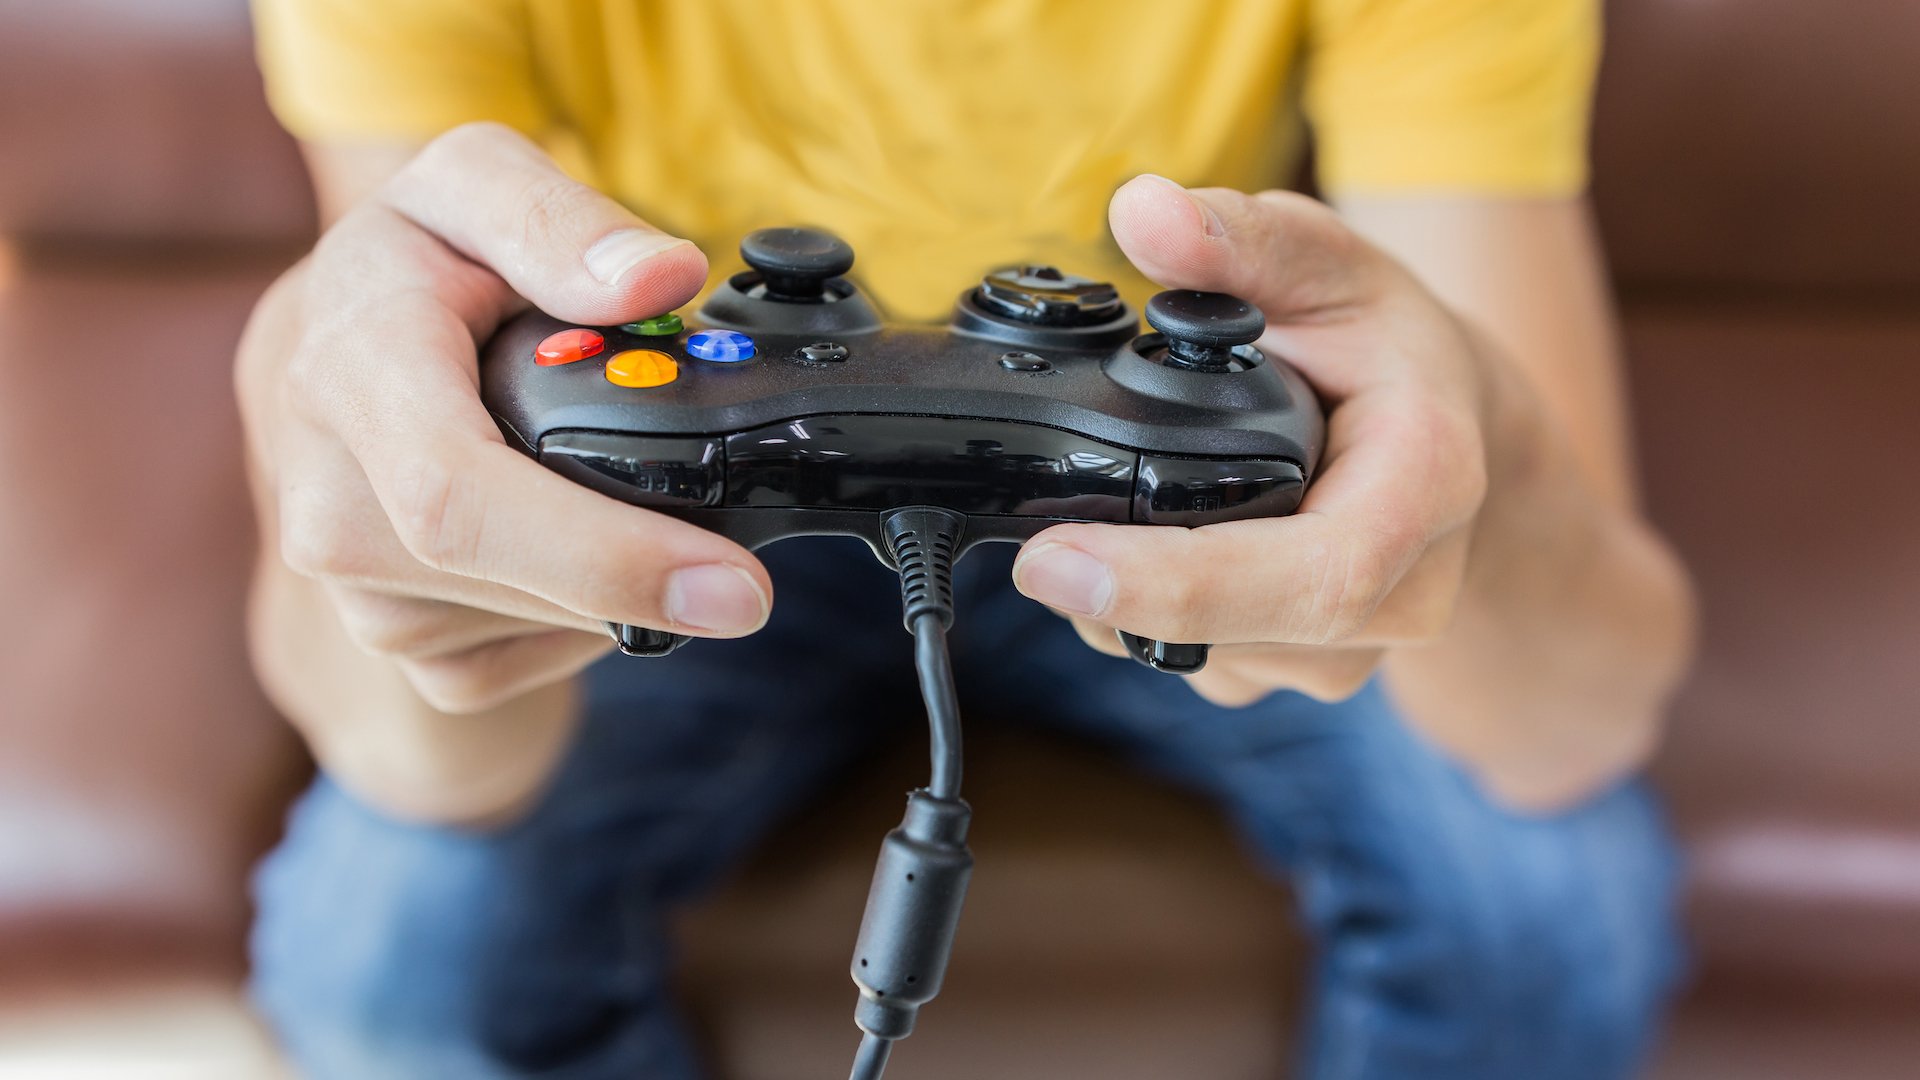 A man holding a video game controller